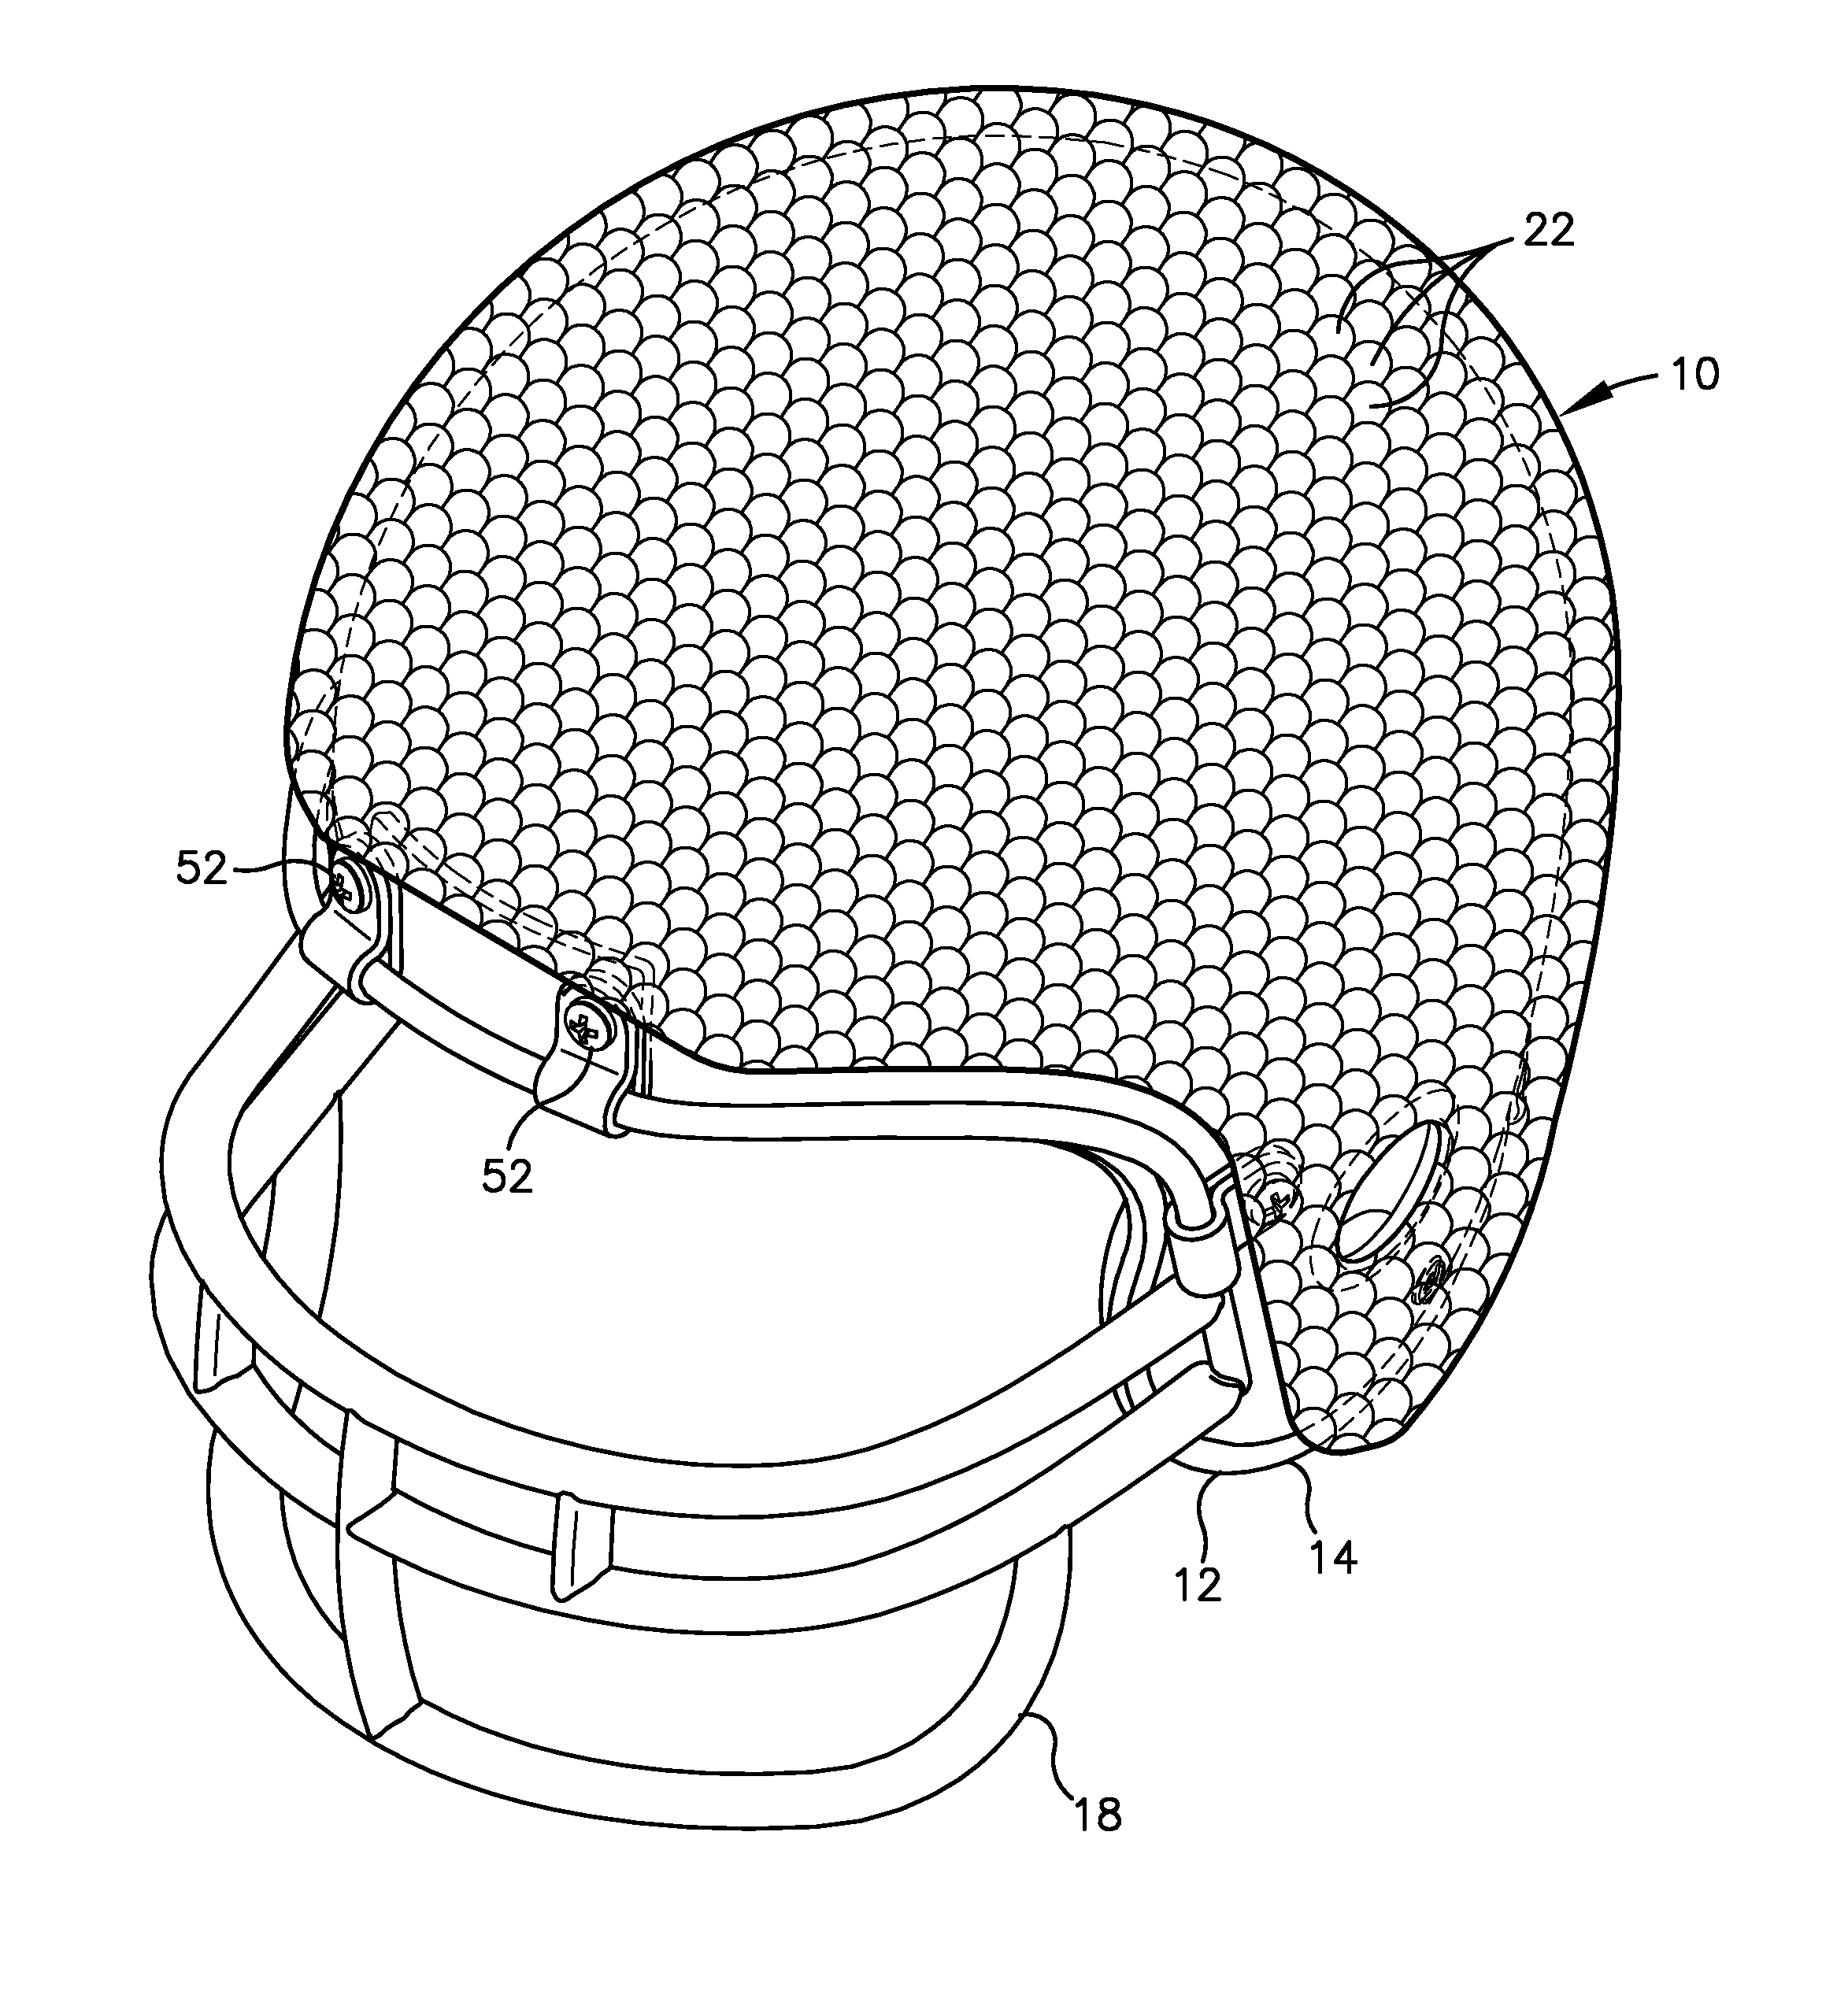 Helmet with external protective scales